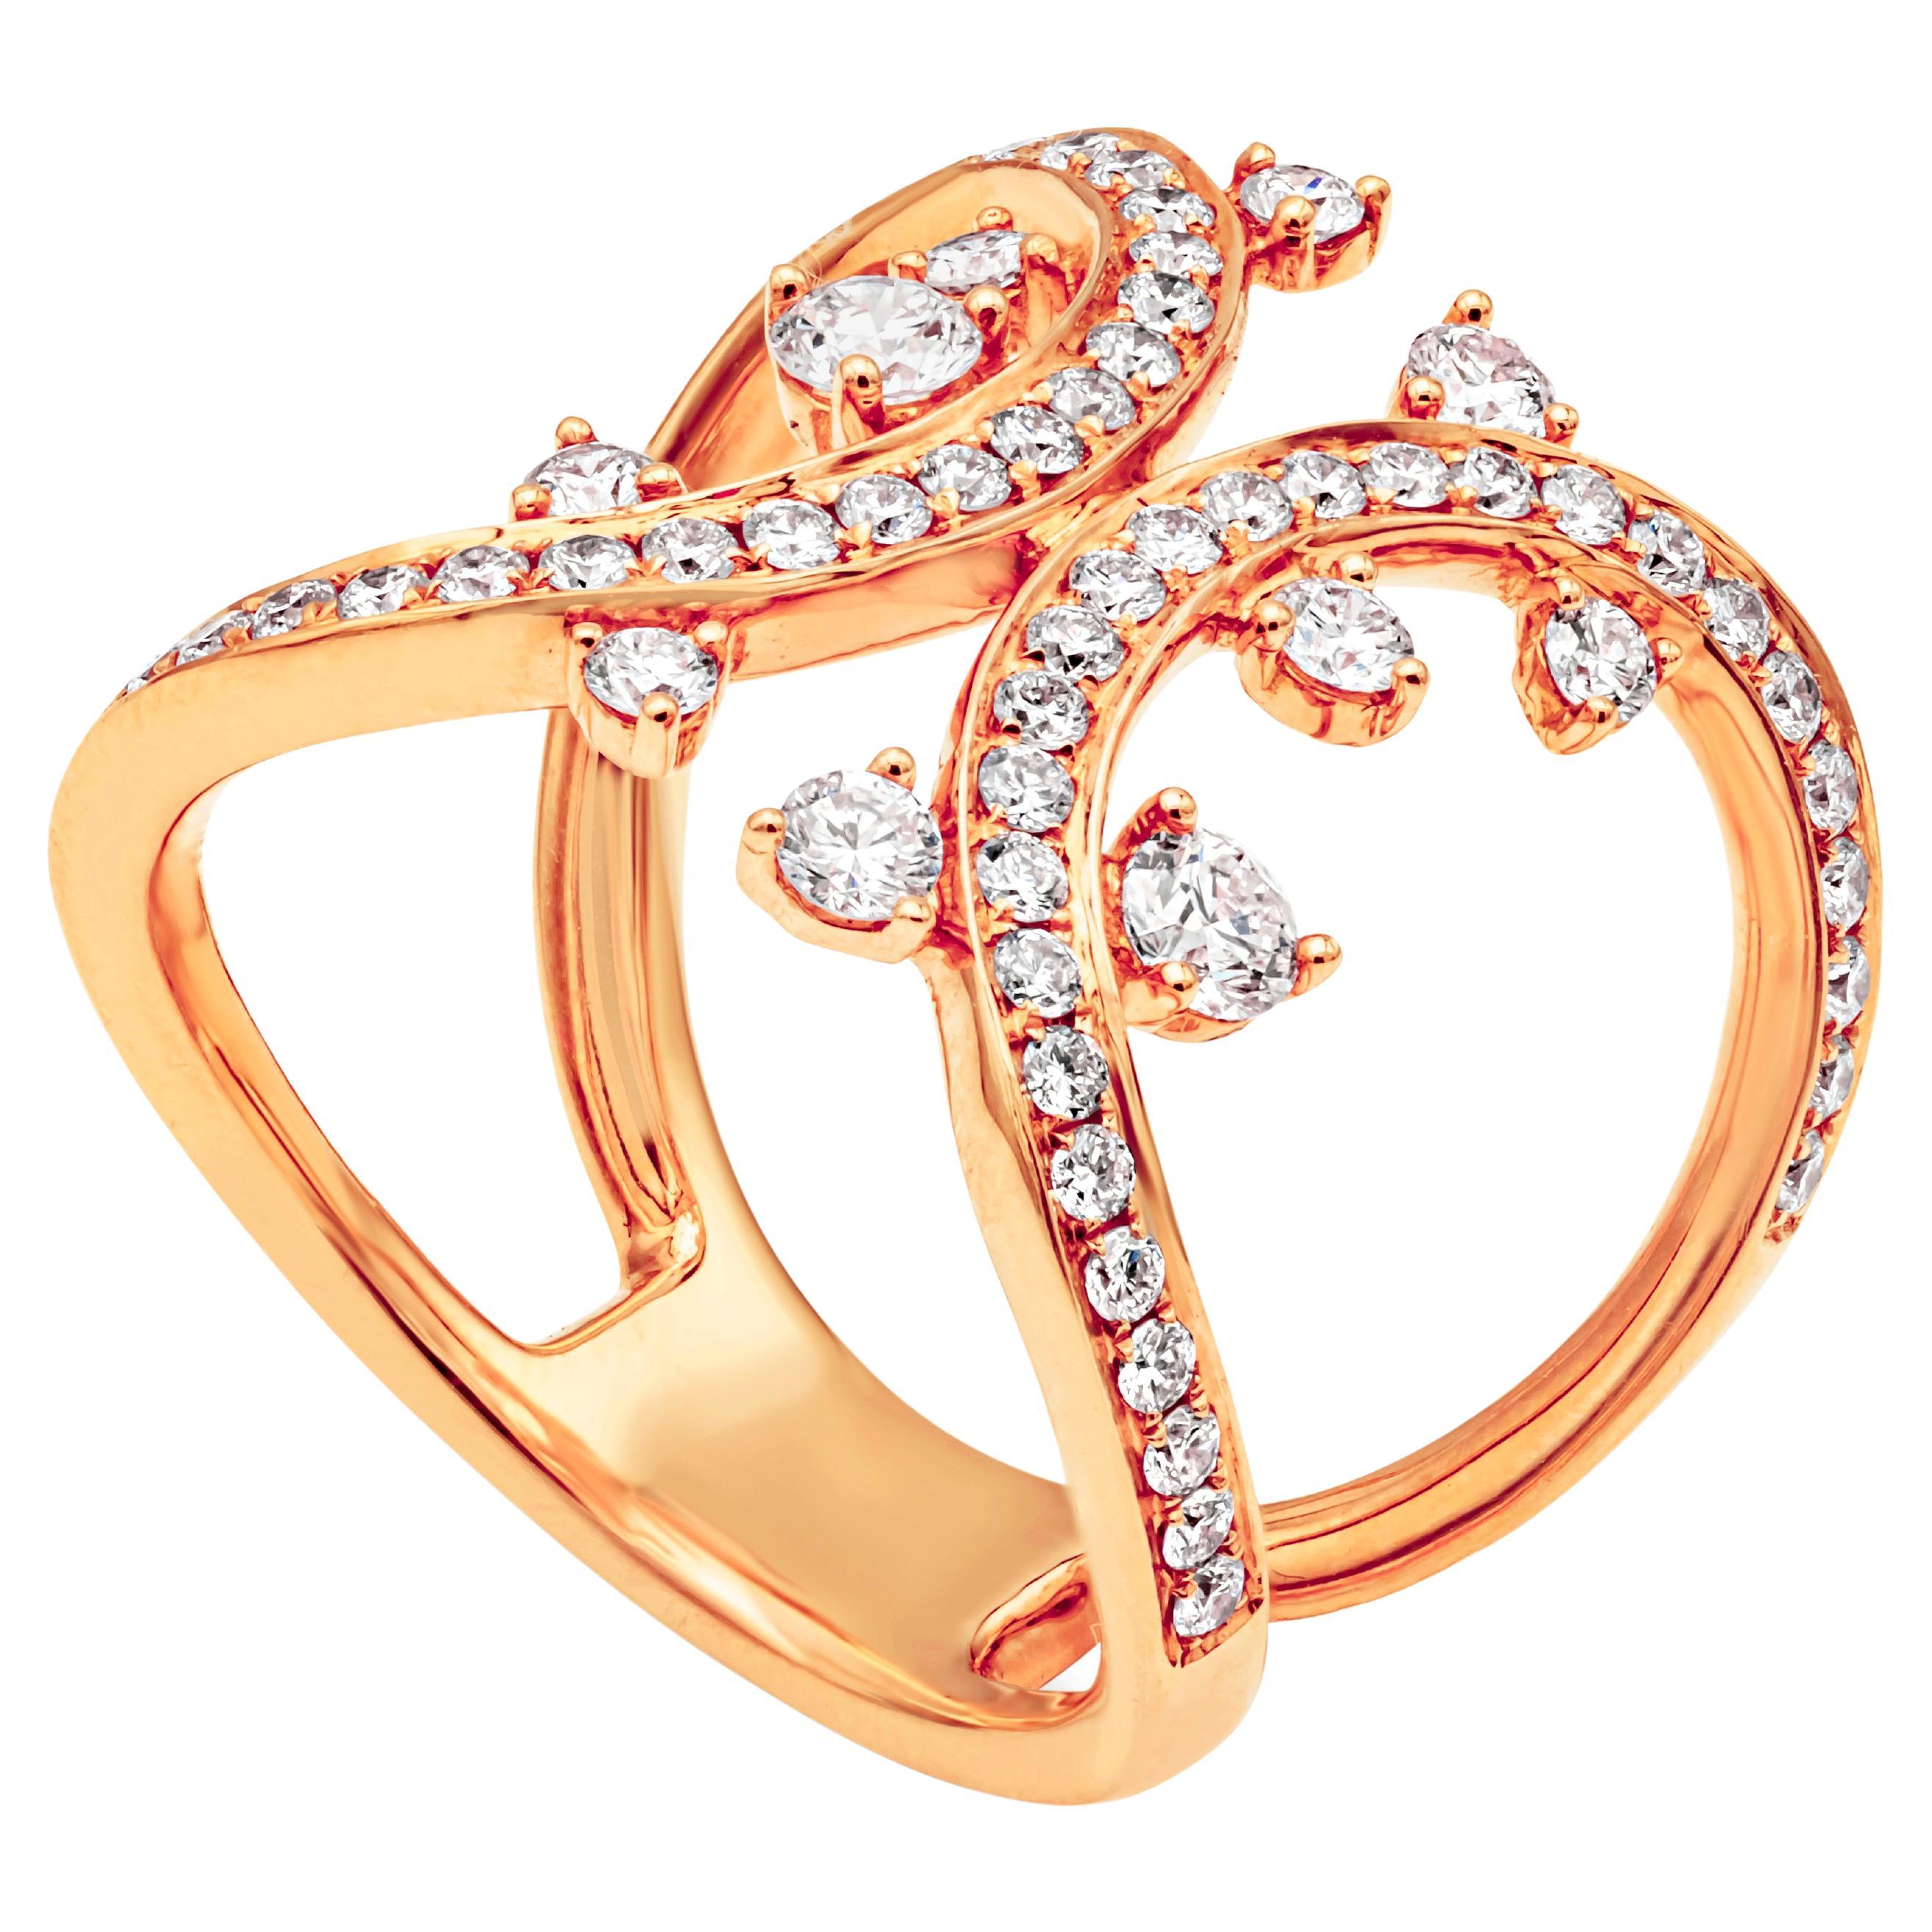 Shop Fashion Rings | Golden Tree Jewellers in Langley, BC